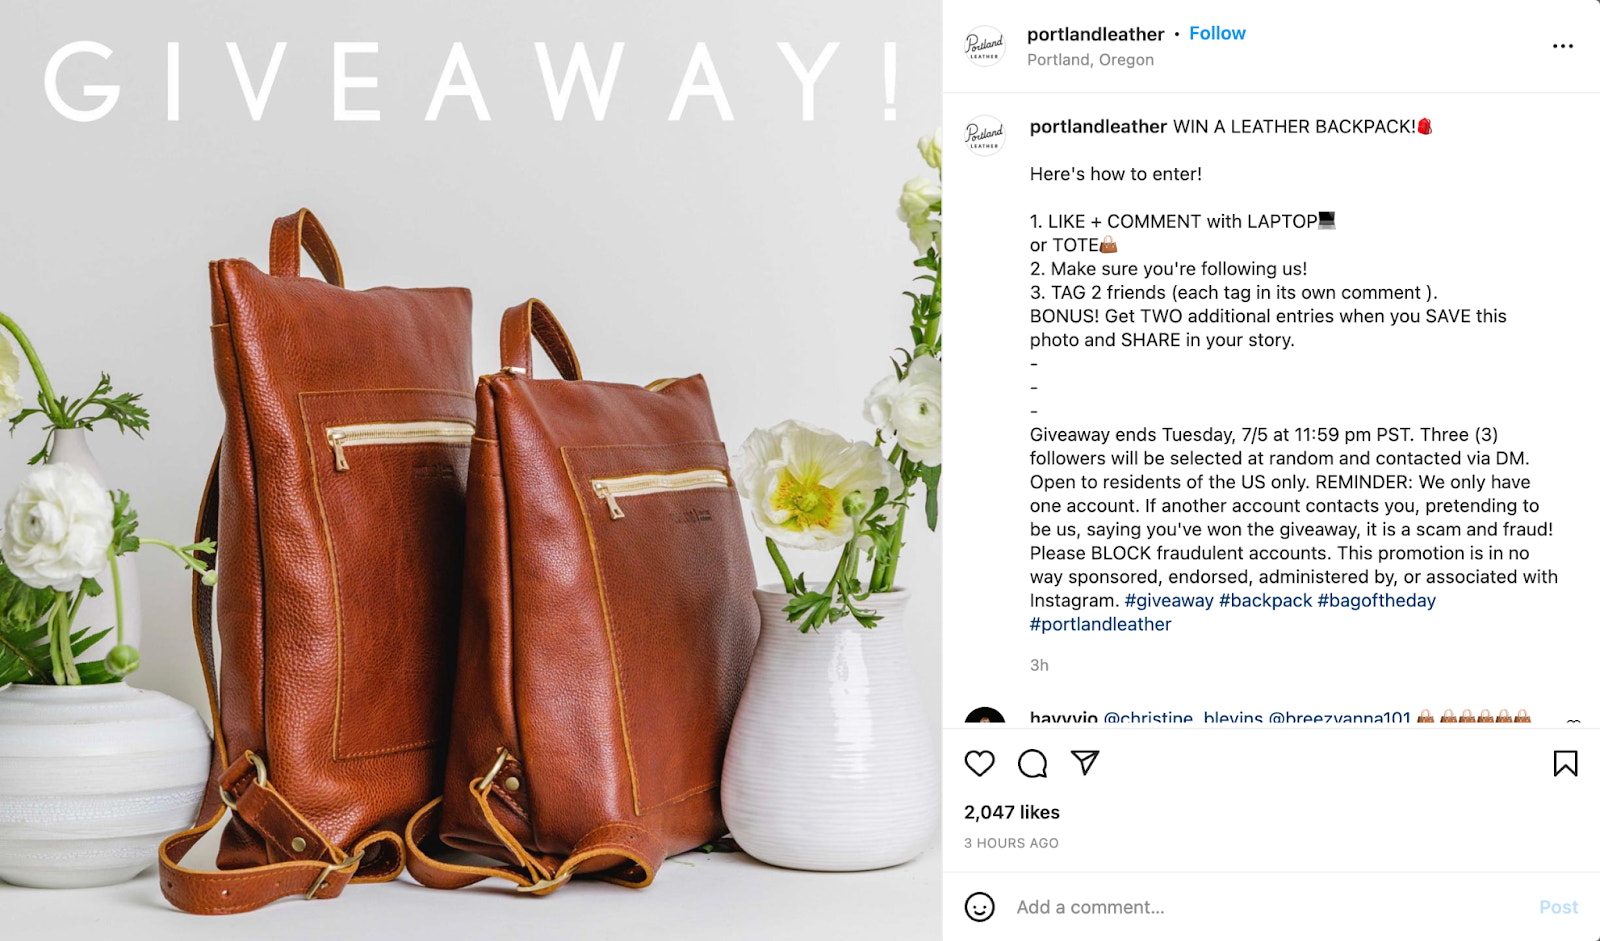 How To Run An Instagram Giveaway In 2023? Top Ideas And Tools